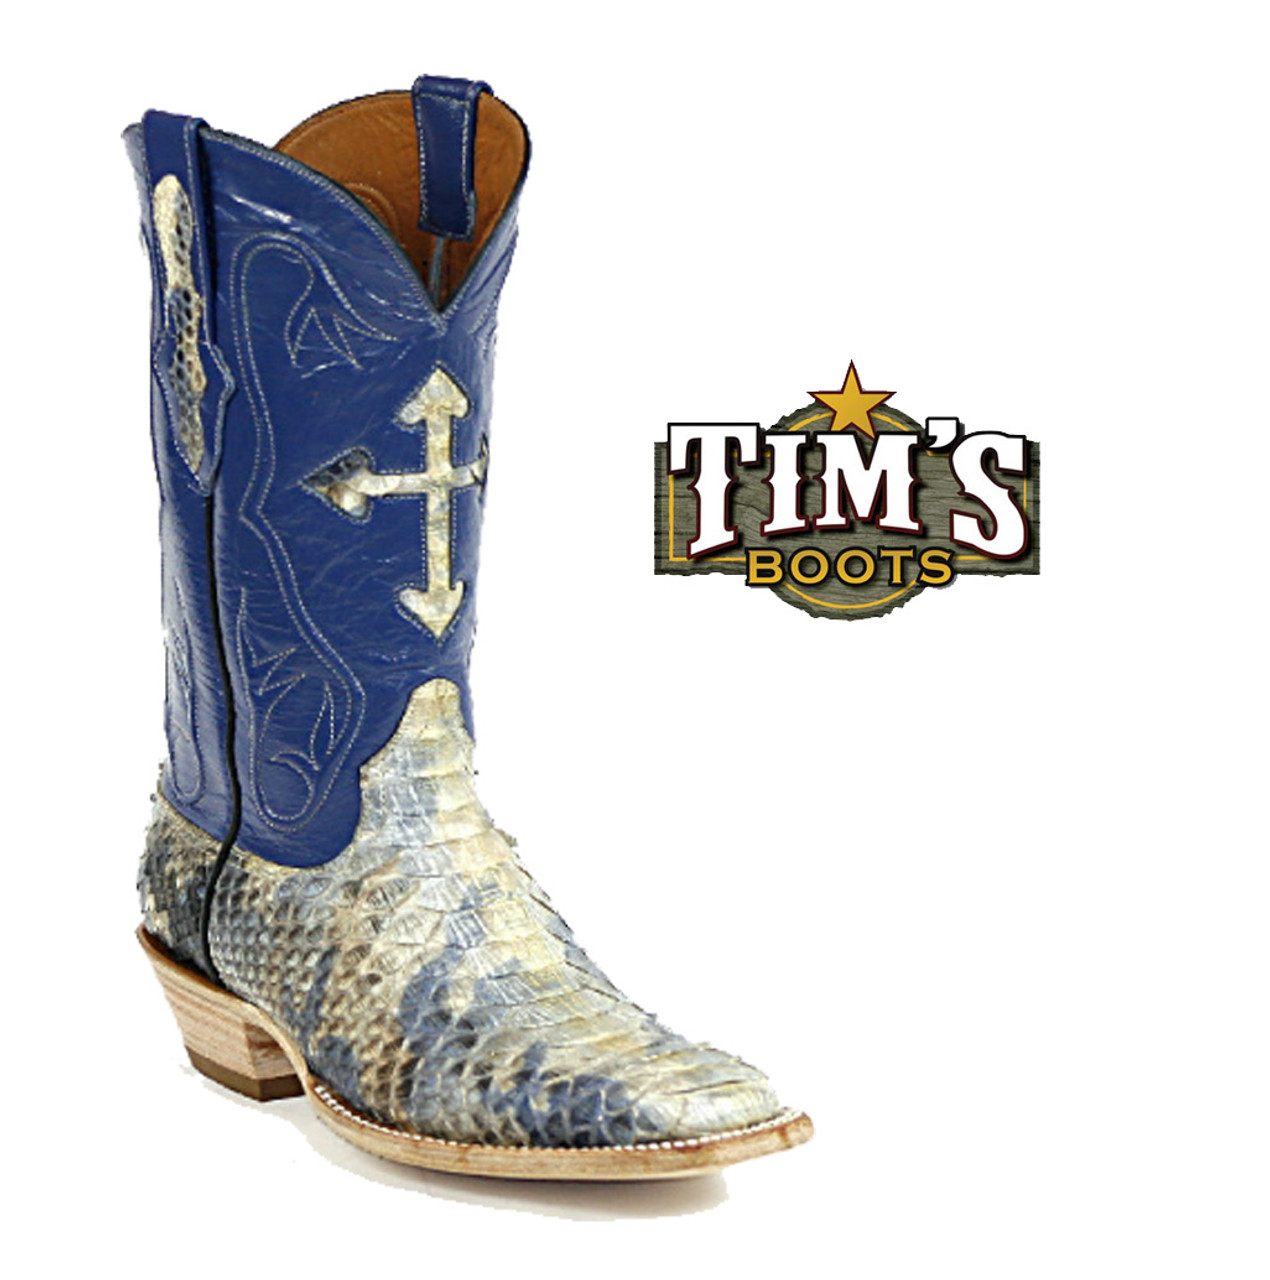 black and blue cowboy boots